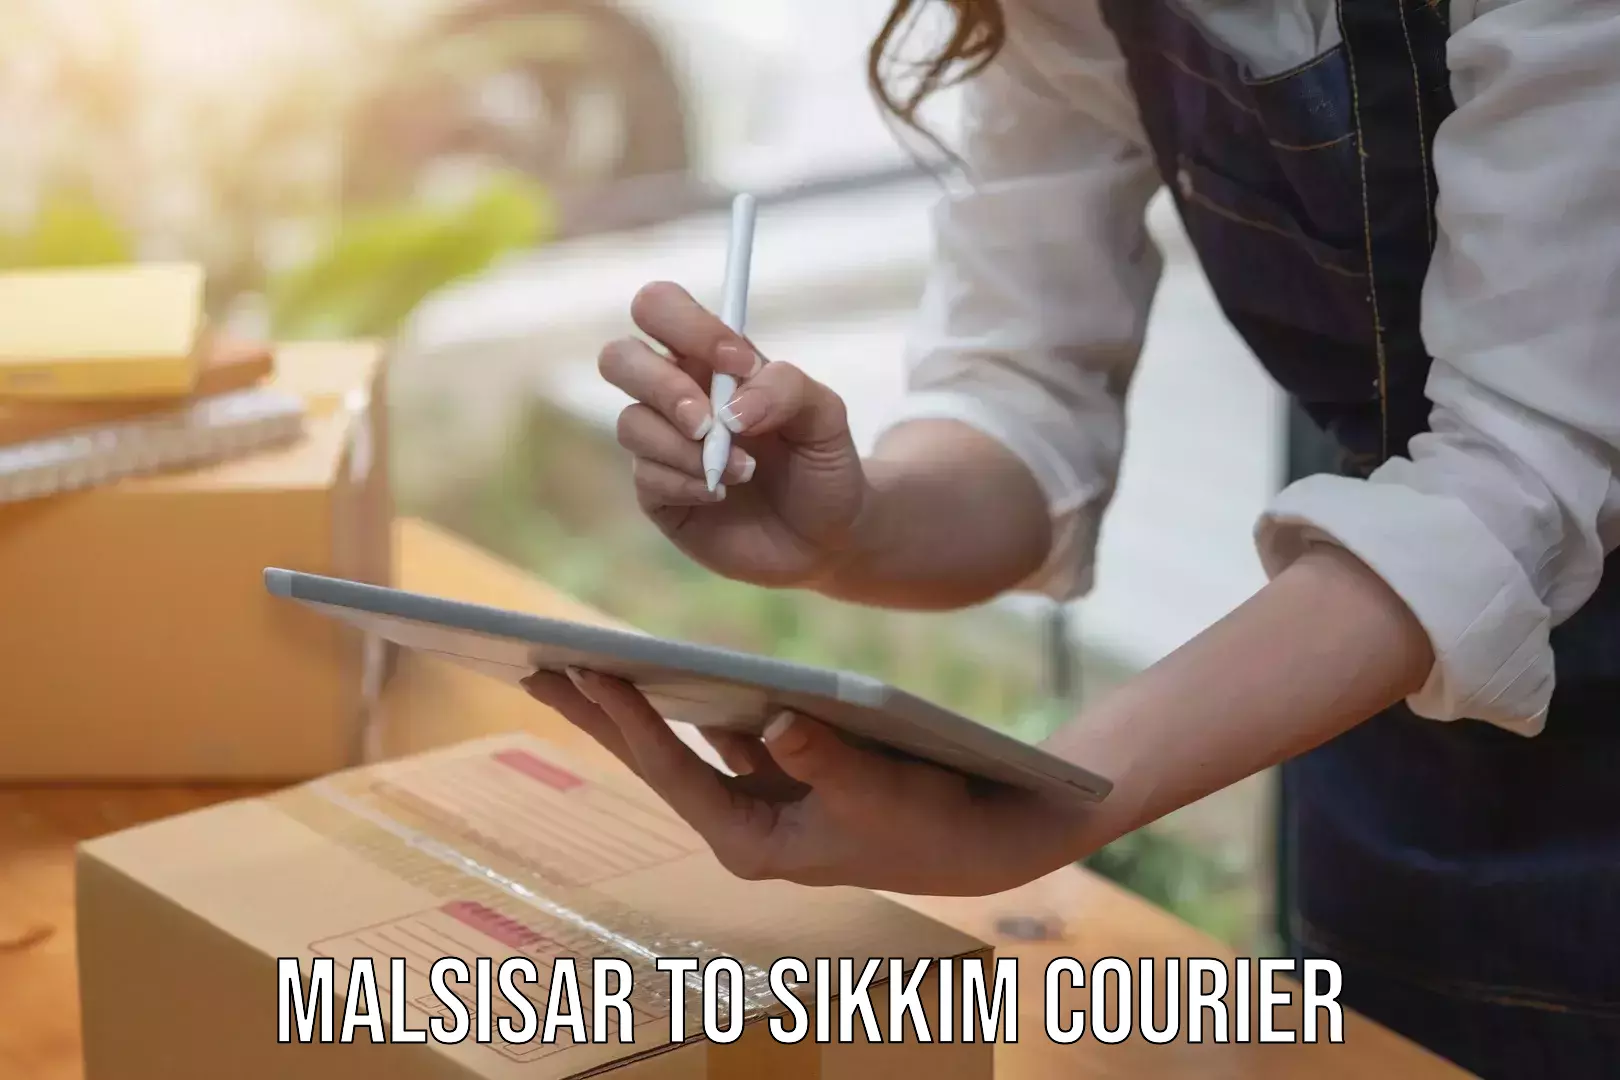 State-of-the-art courier technology Malsisar to South Sikkim